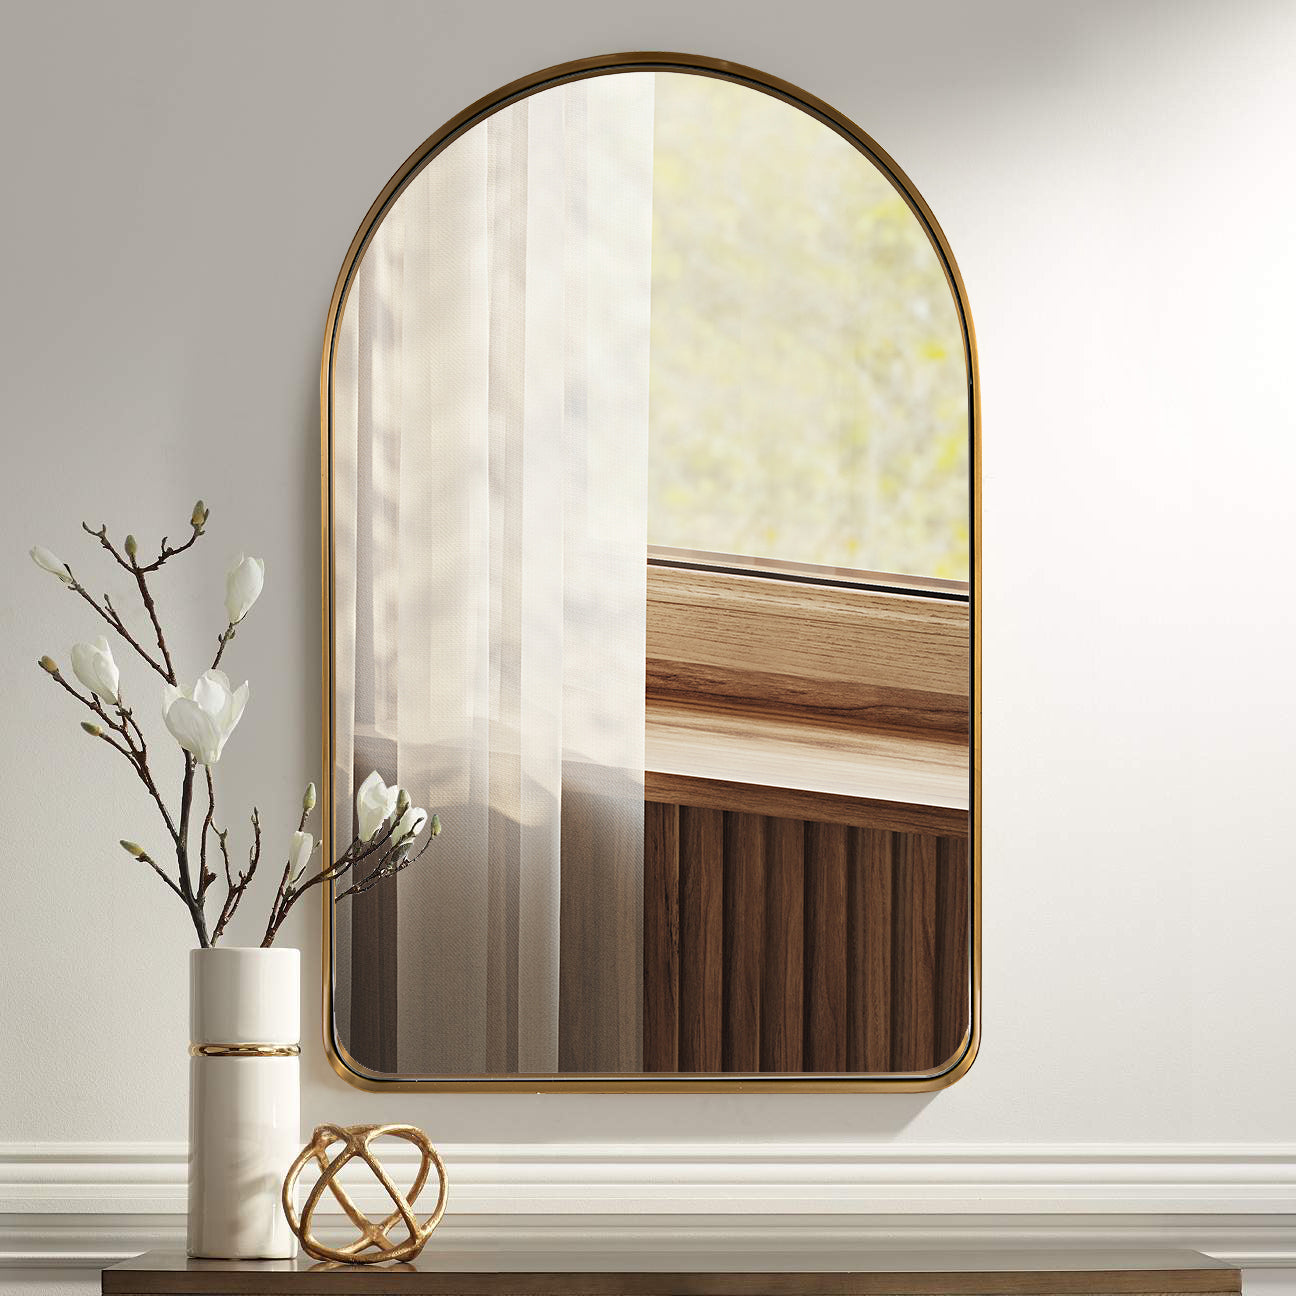 Antique Arched Bathroom Wall Mirror, Vanity Wall Mounted mirrors | Stainless Steel Frame